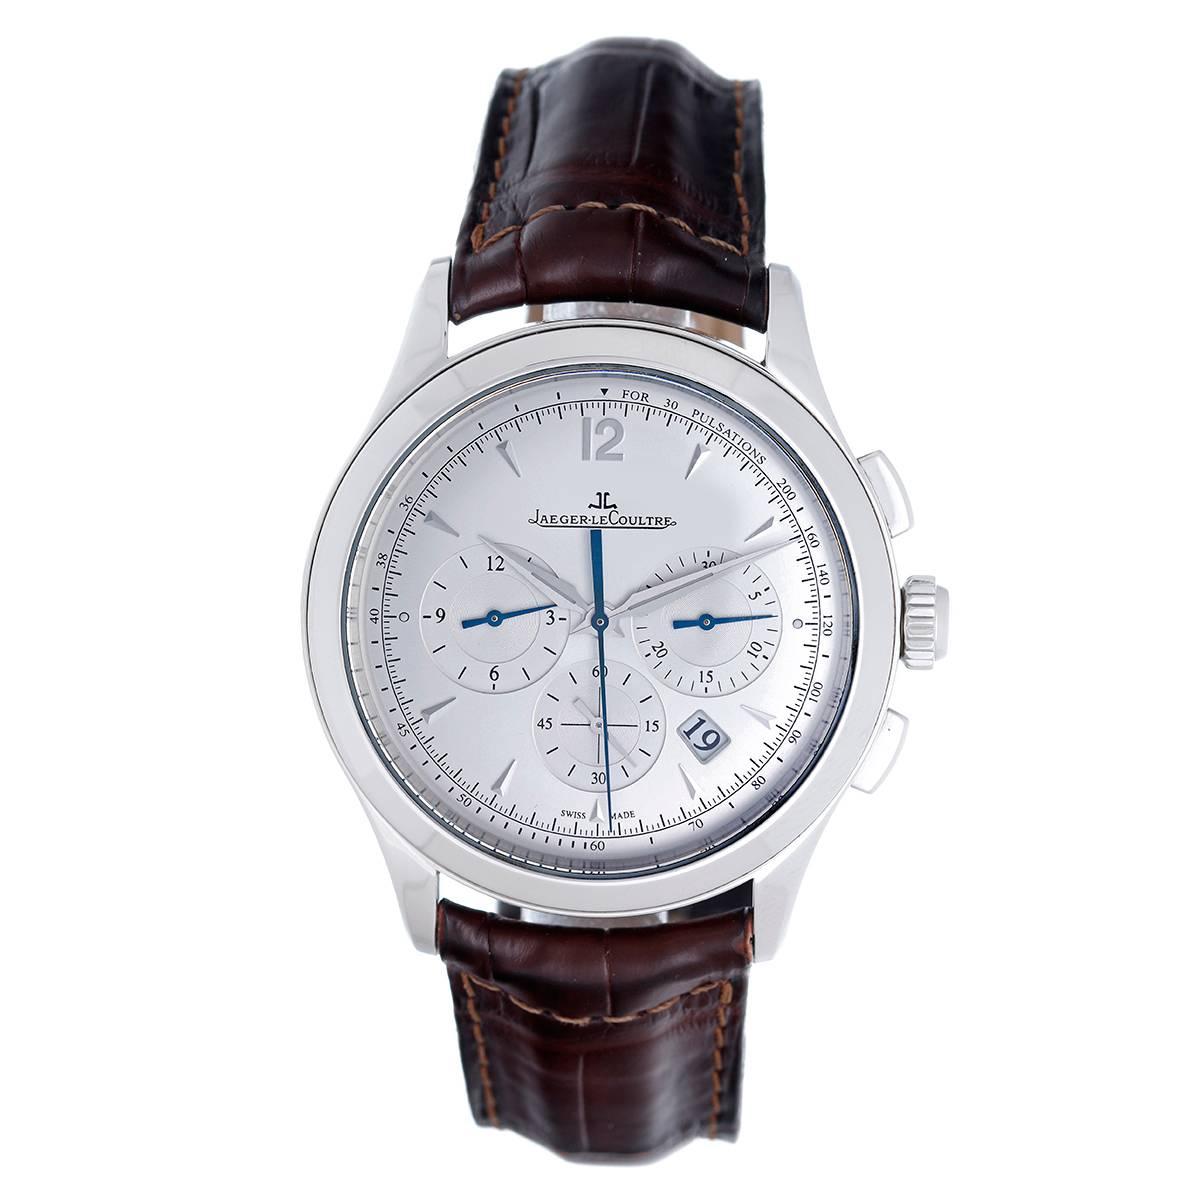 Jaeger-LeCoultre Stainless Steel Master Control Chronograph Wristwatch 